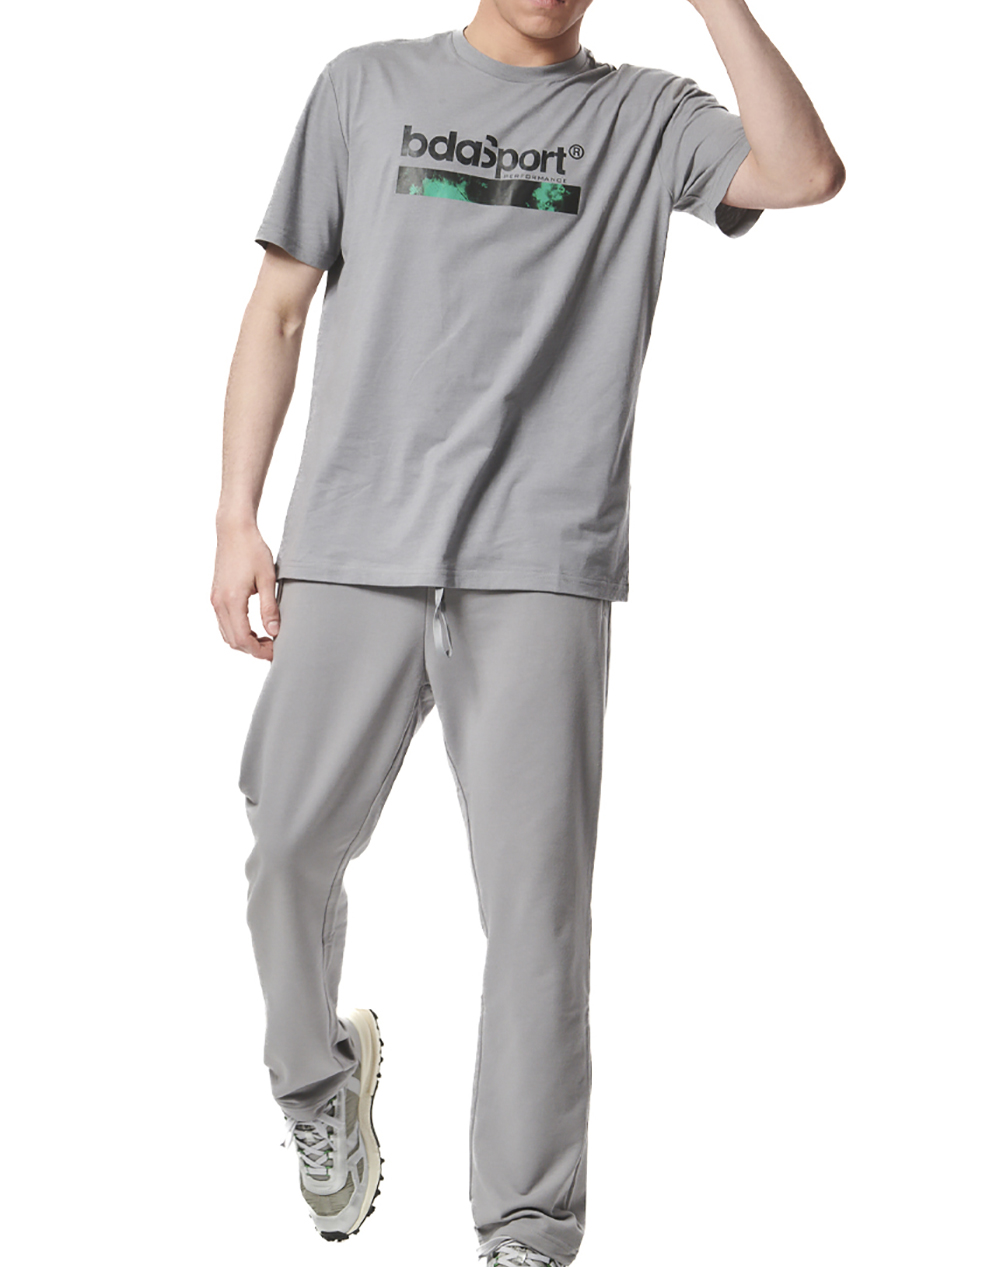 BODY ACTION MENS ESSENTIAL STRAIGHT SWEATPANTS W/ZIPPERS